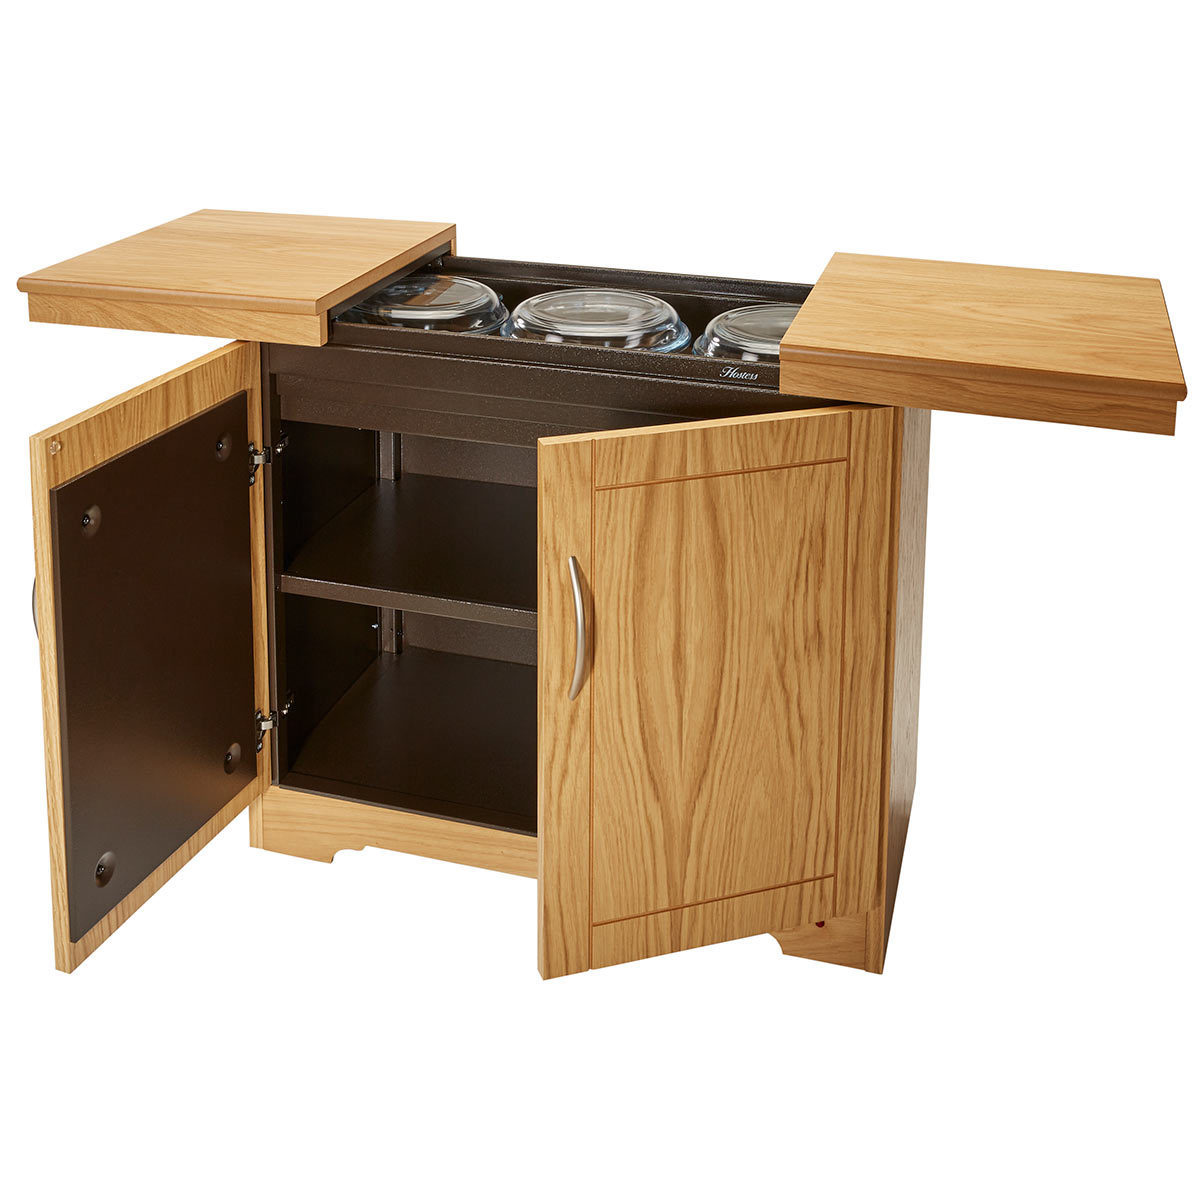 Hostess Heated Trolley with Natural Oak Veneer Finish, HL6244NO